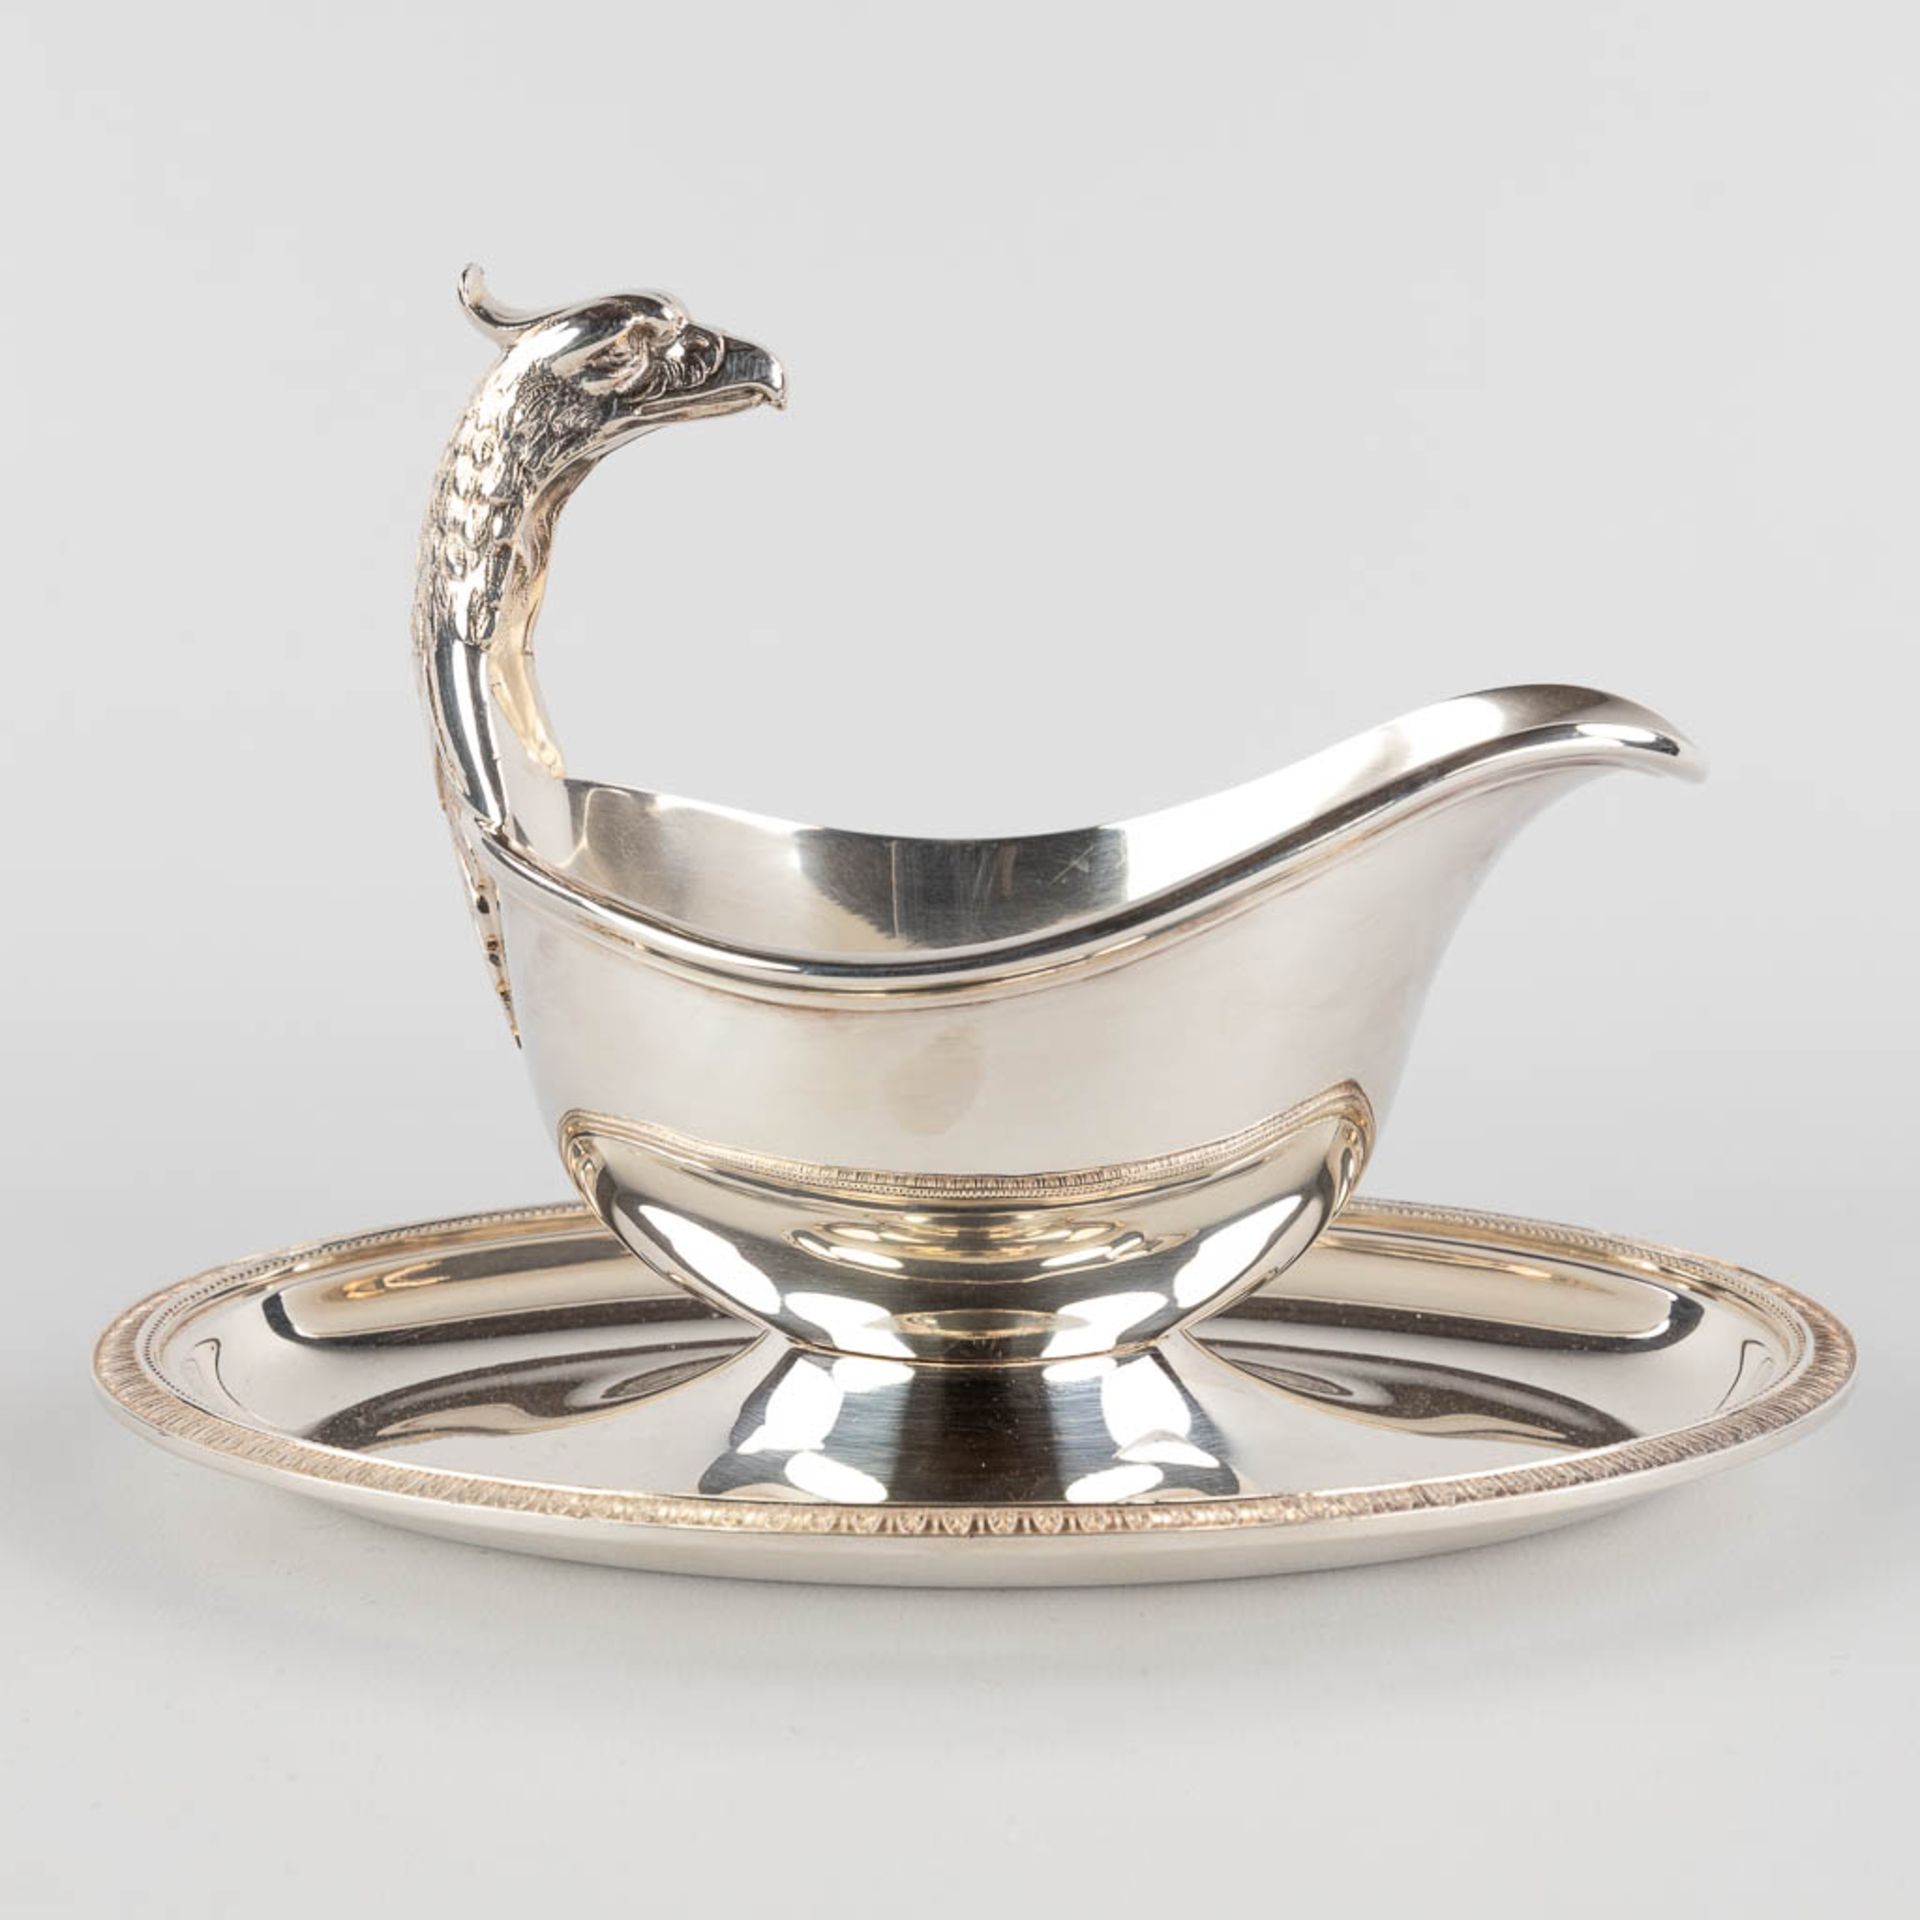 Christofle France, three pieces of silver plated serving accessories. (D:32 x W:45 cm) - Image 9 of 16